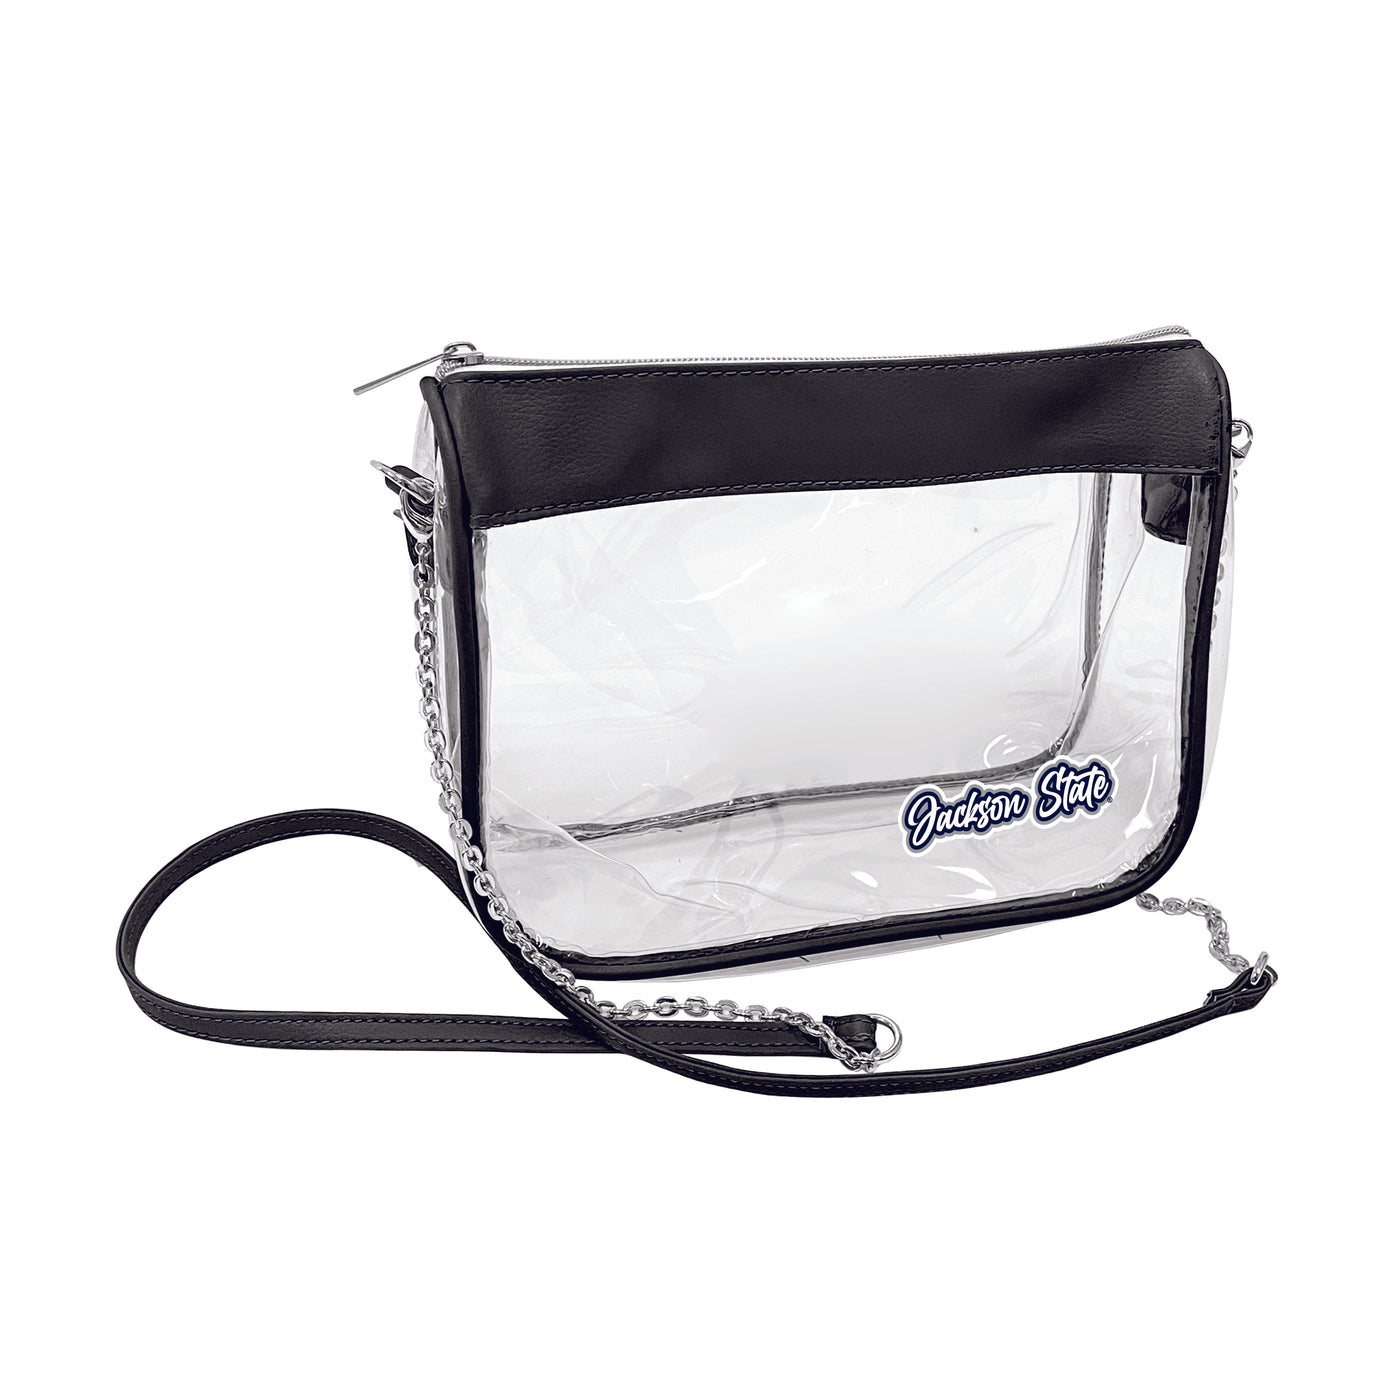 Jackson State Hype Clear Bag